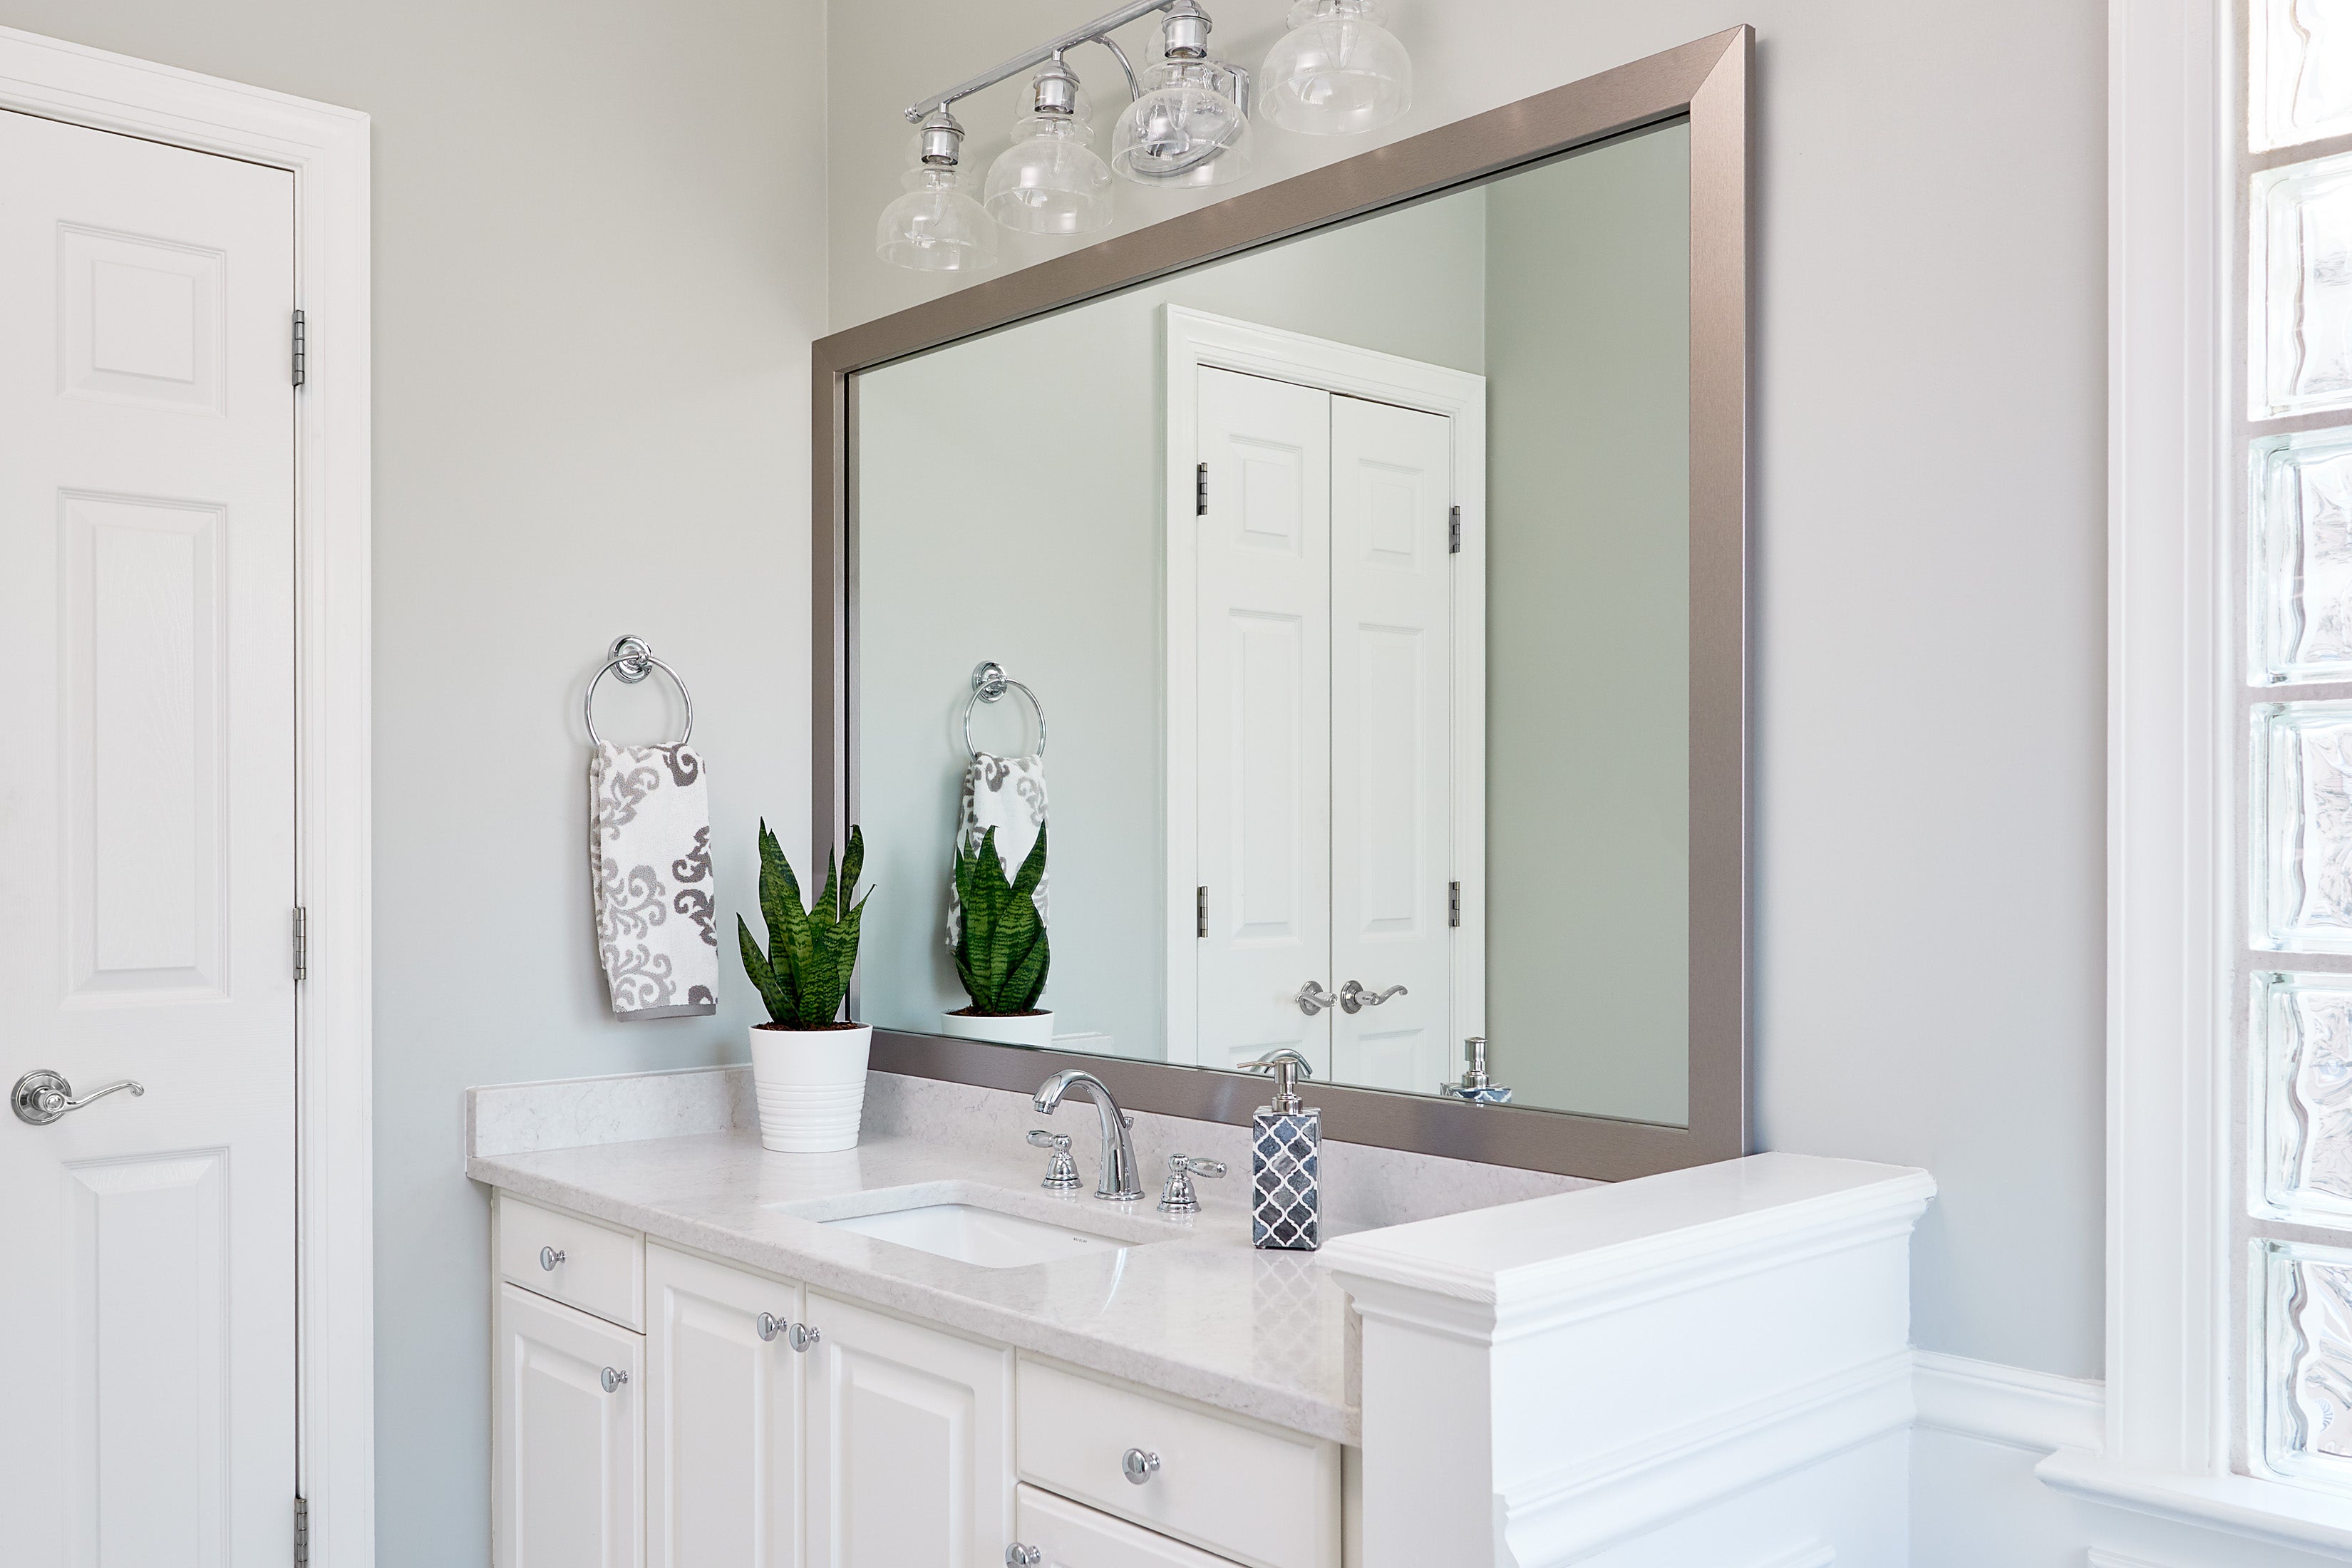 Custom Mirrors - Install or Replace Mirrors - Cut Rate Glass